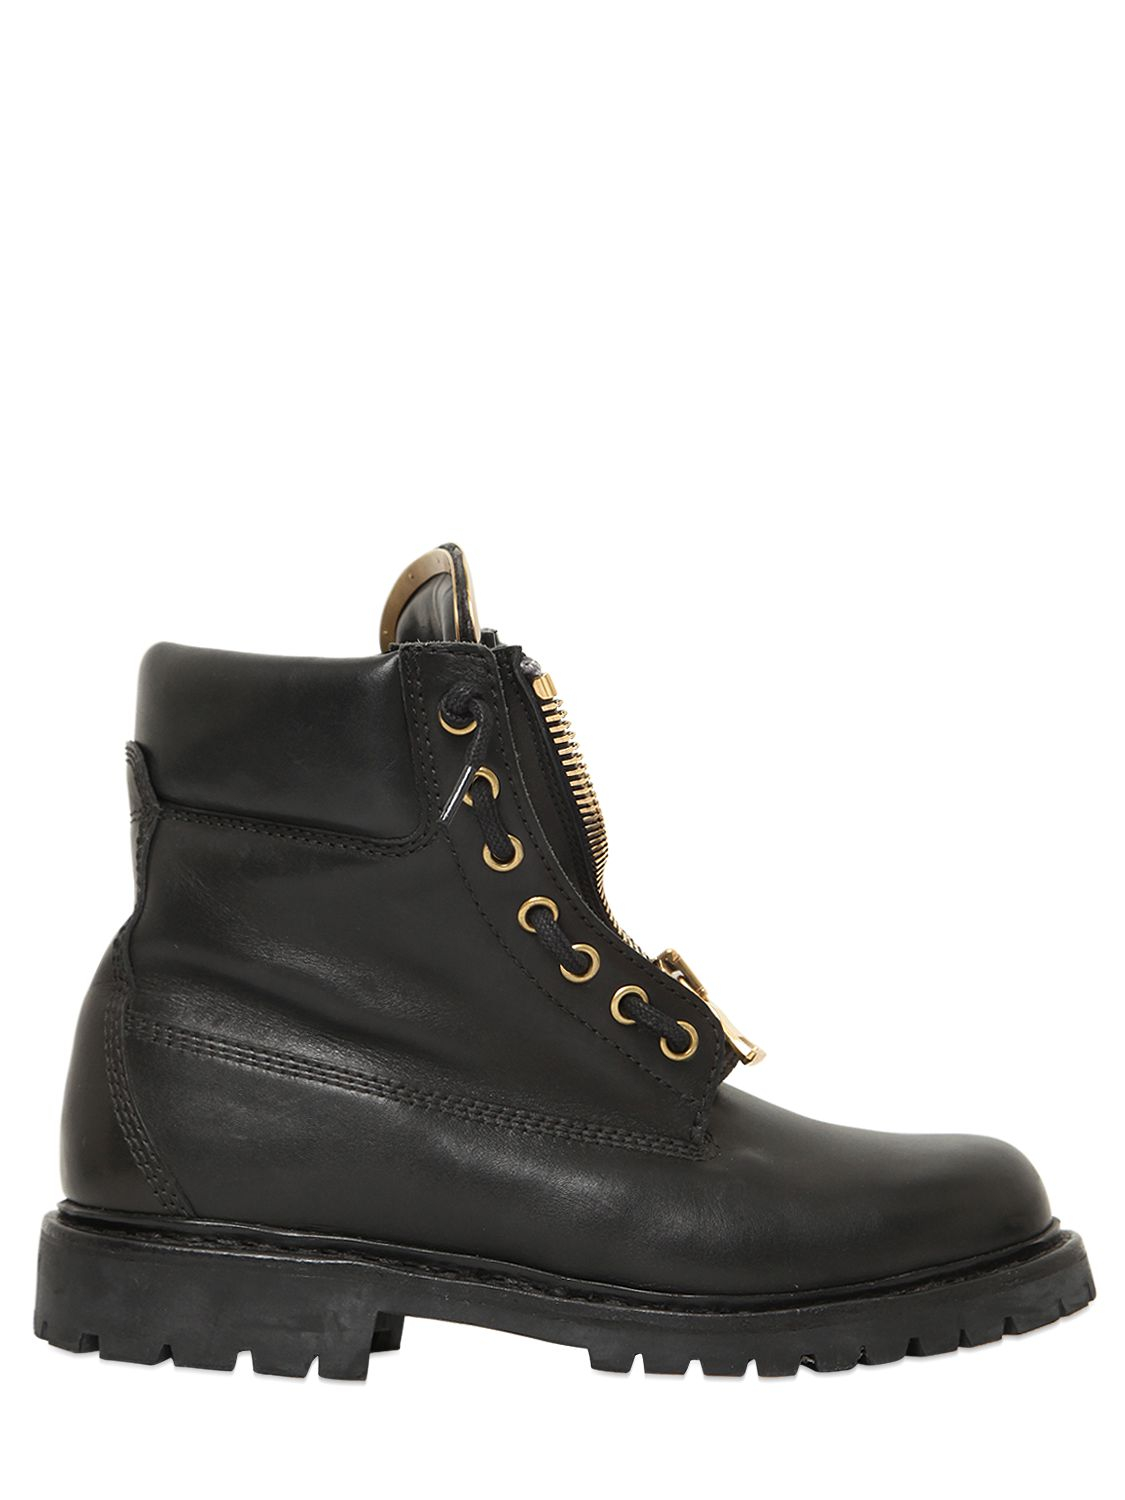 Balmain Taiga Leather Ankle Boots in Black for Men | Lyst